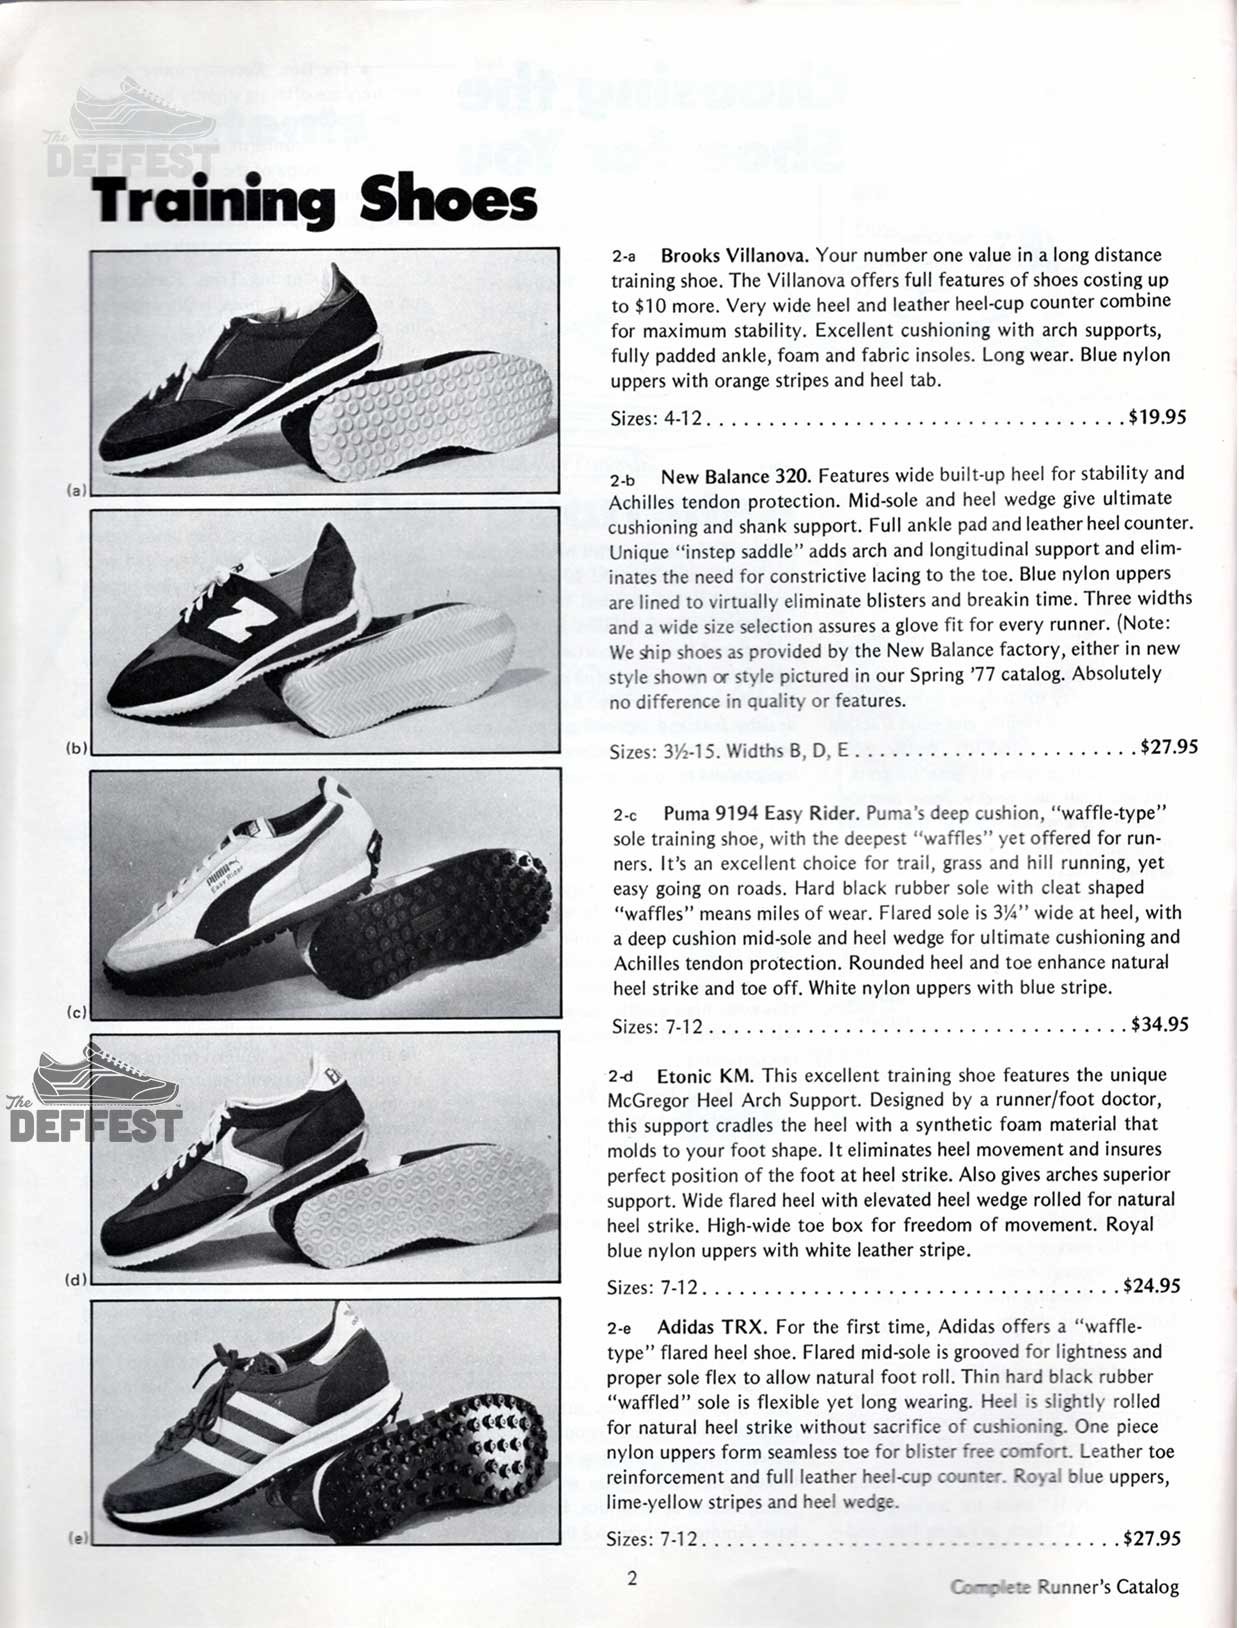 Starting Line Sports 'The Complete Runner's Catalog' Fall 1977 Vintage running shoes